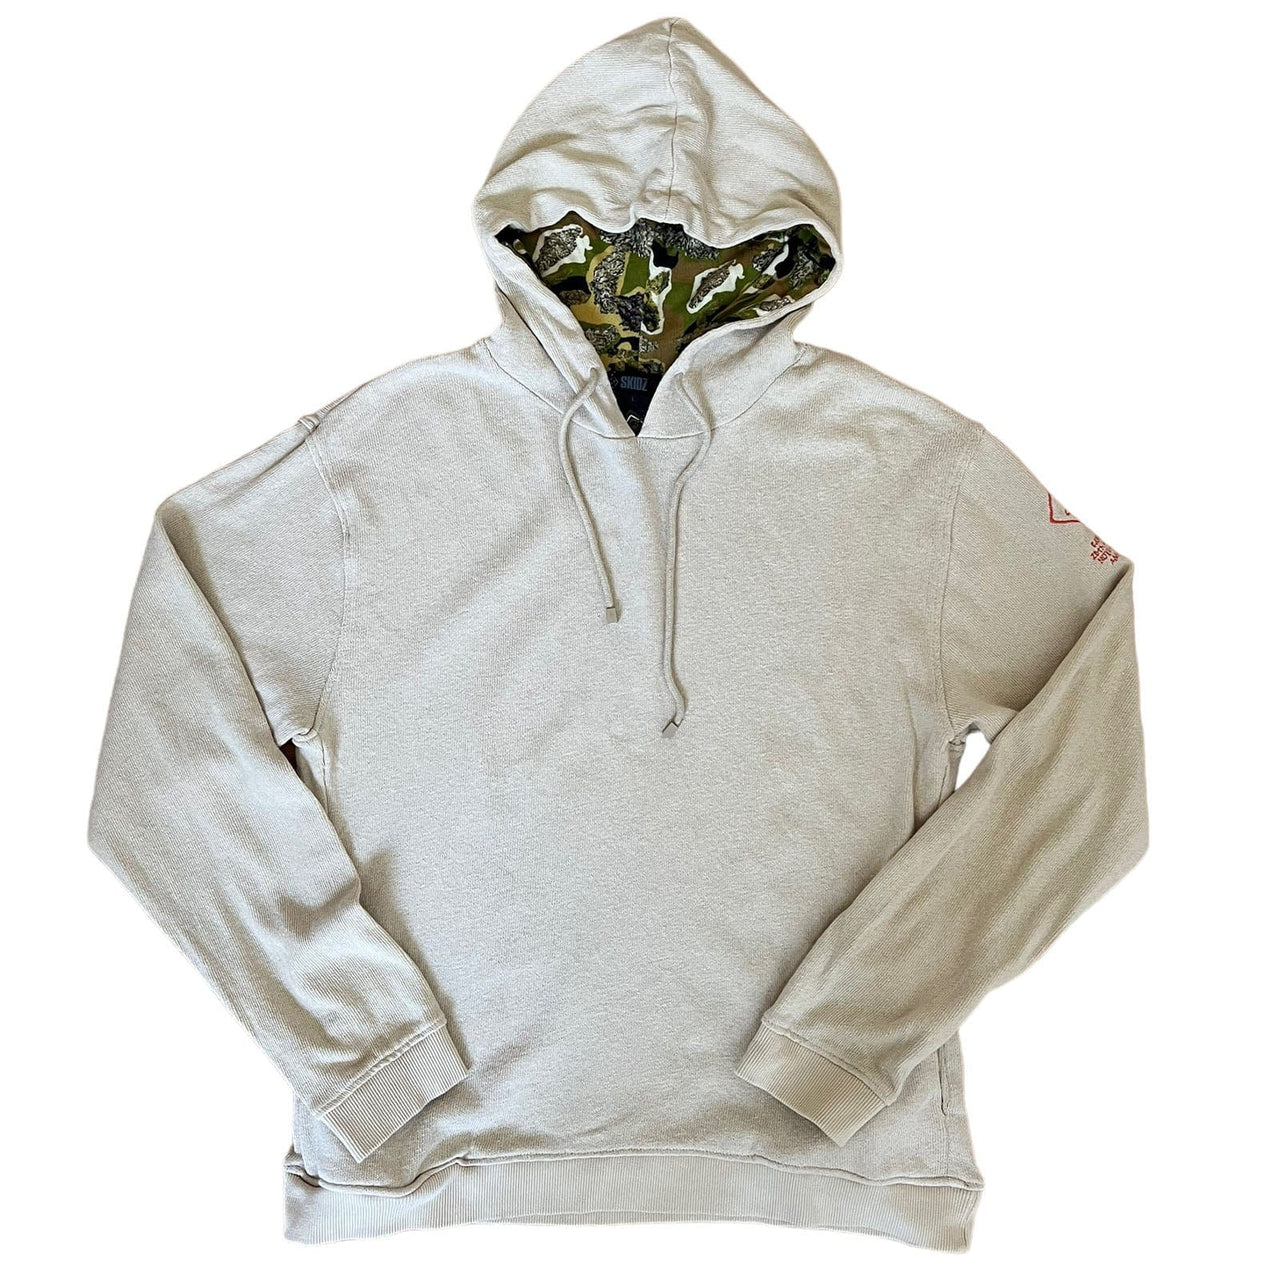 Skidz Shirts & Tops Copy of 2007 Cannabis Cup Amsterdam Hoodie - Natural White